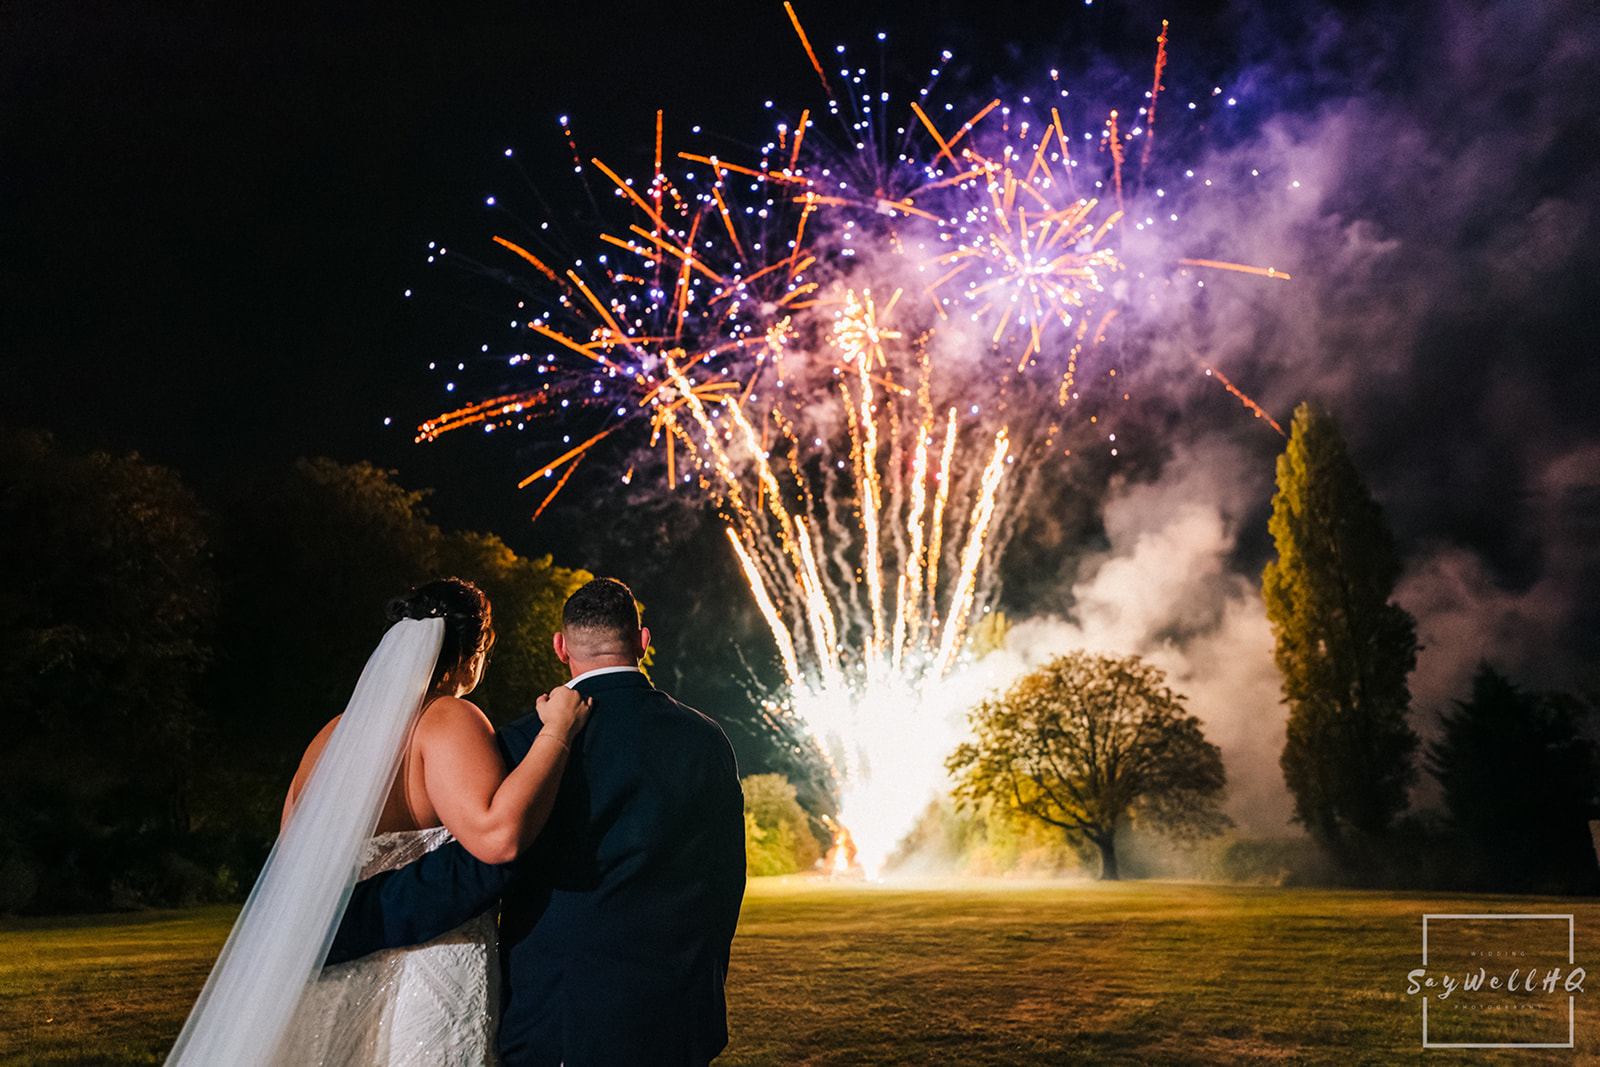 Documentary Wedding Photography Portfolio - bride and groom looking on during the fireworks display